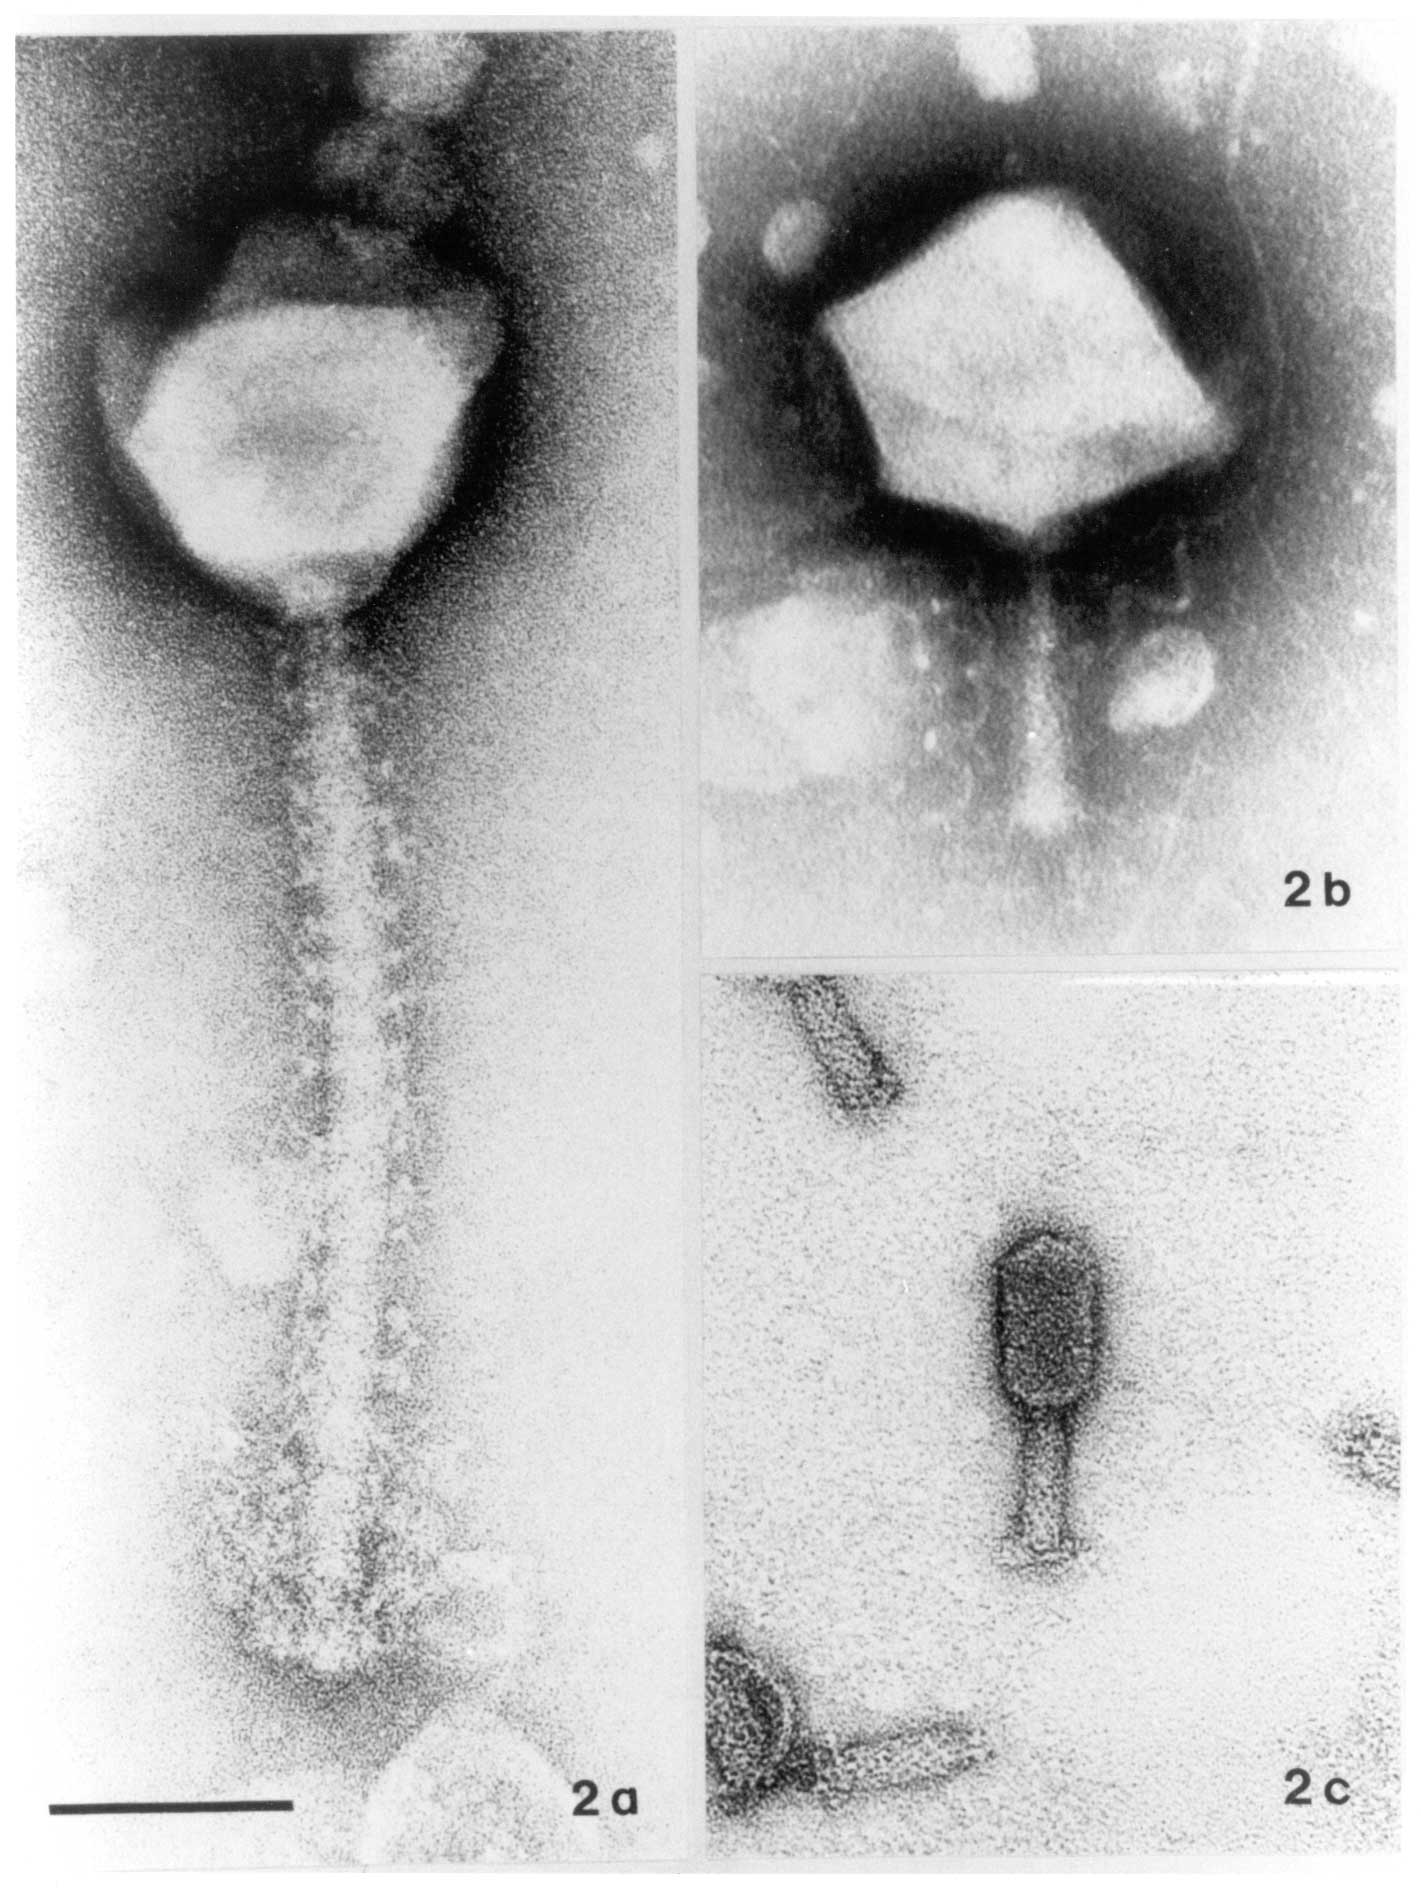 Figure 2-2: Selected myoviruses. (a) Bacillus megaterium phage G, the largest myovirus known; note the spiral filament around the tail. (b) Giant unknown bacteriophage found in macerated debris of Bombyx mori�; note wavy tail fibers. Phage heads of this size are easily deformed. (c). Bdellovibrio bacteriovorus phage phi1402, the smallest myovirus known (isolated by B.A. Fane, Department of Veterinary Science, University of Arizona, Tucson, AZ). X 297,000; bar indicates 100 nm. Phosphotungstate (2%, pH 7.2) (a, b)�and uranyl acetate (2%, pH 4.0) (c).